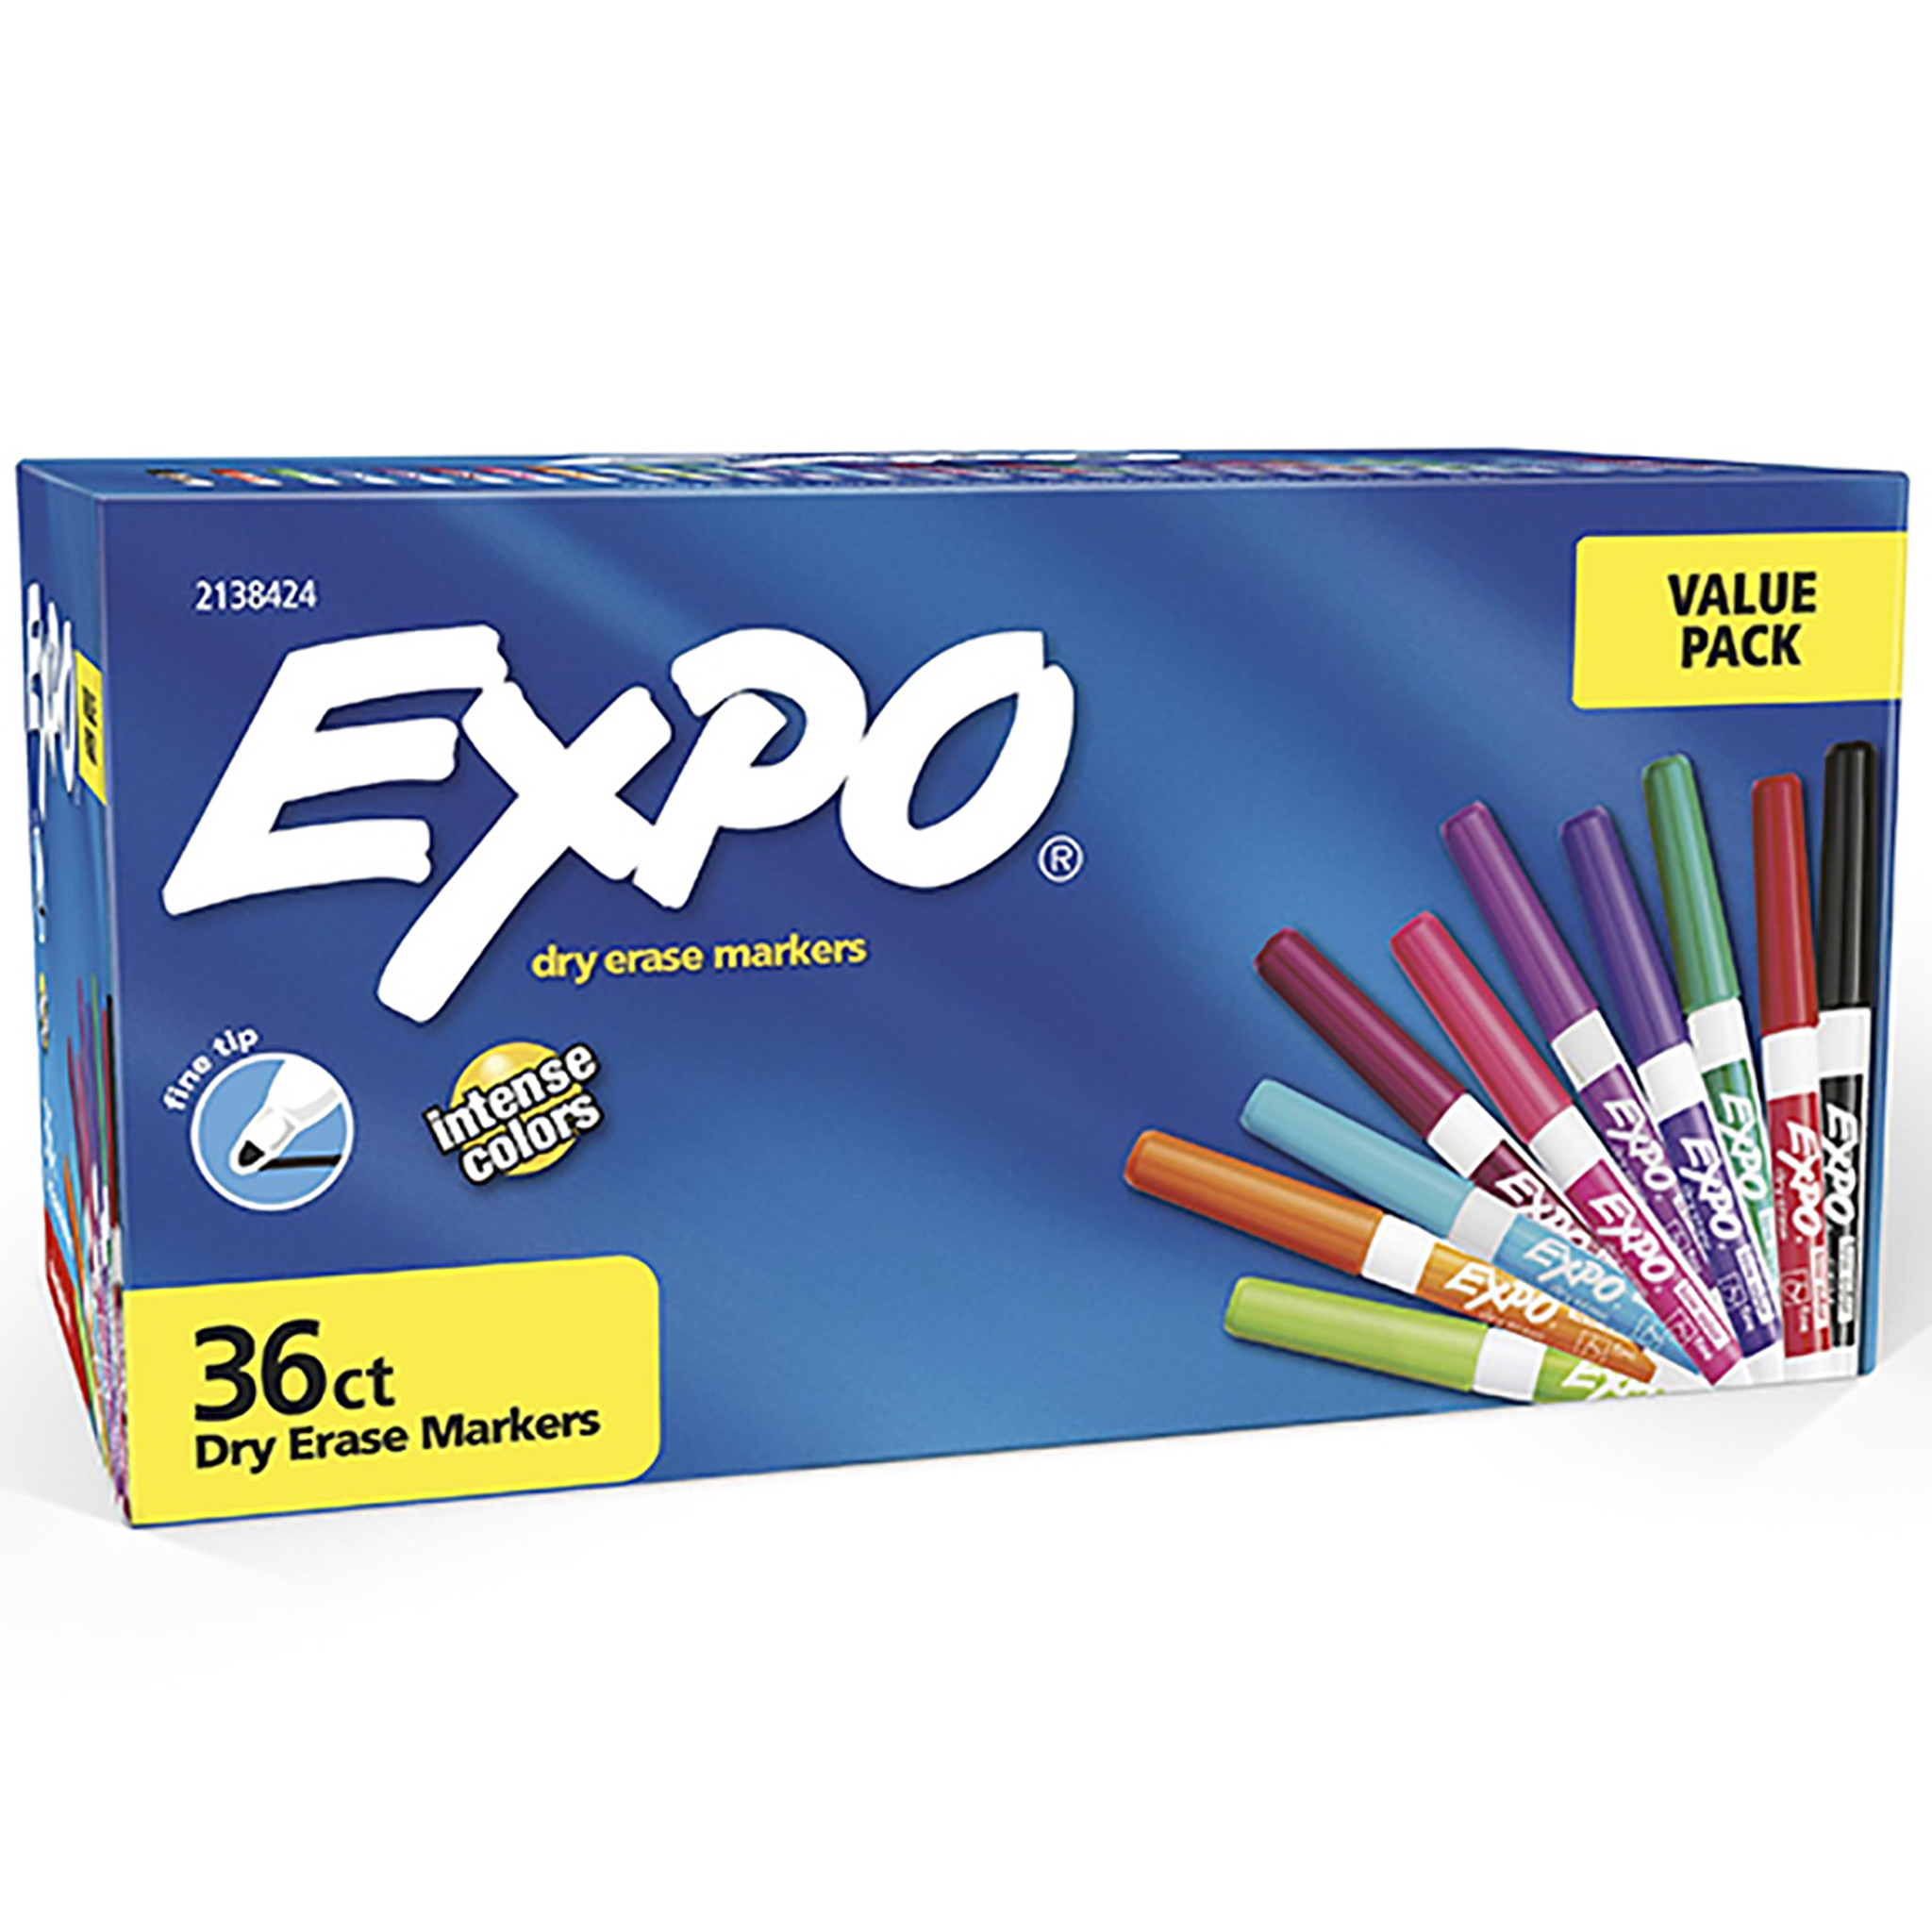 Expo Dry Erase Markers, Low Odour, Fine Tip, Black, 4 Count, Whiteboard  Markers 